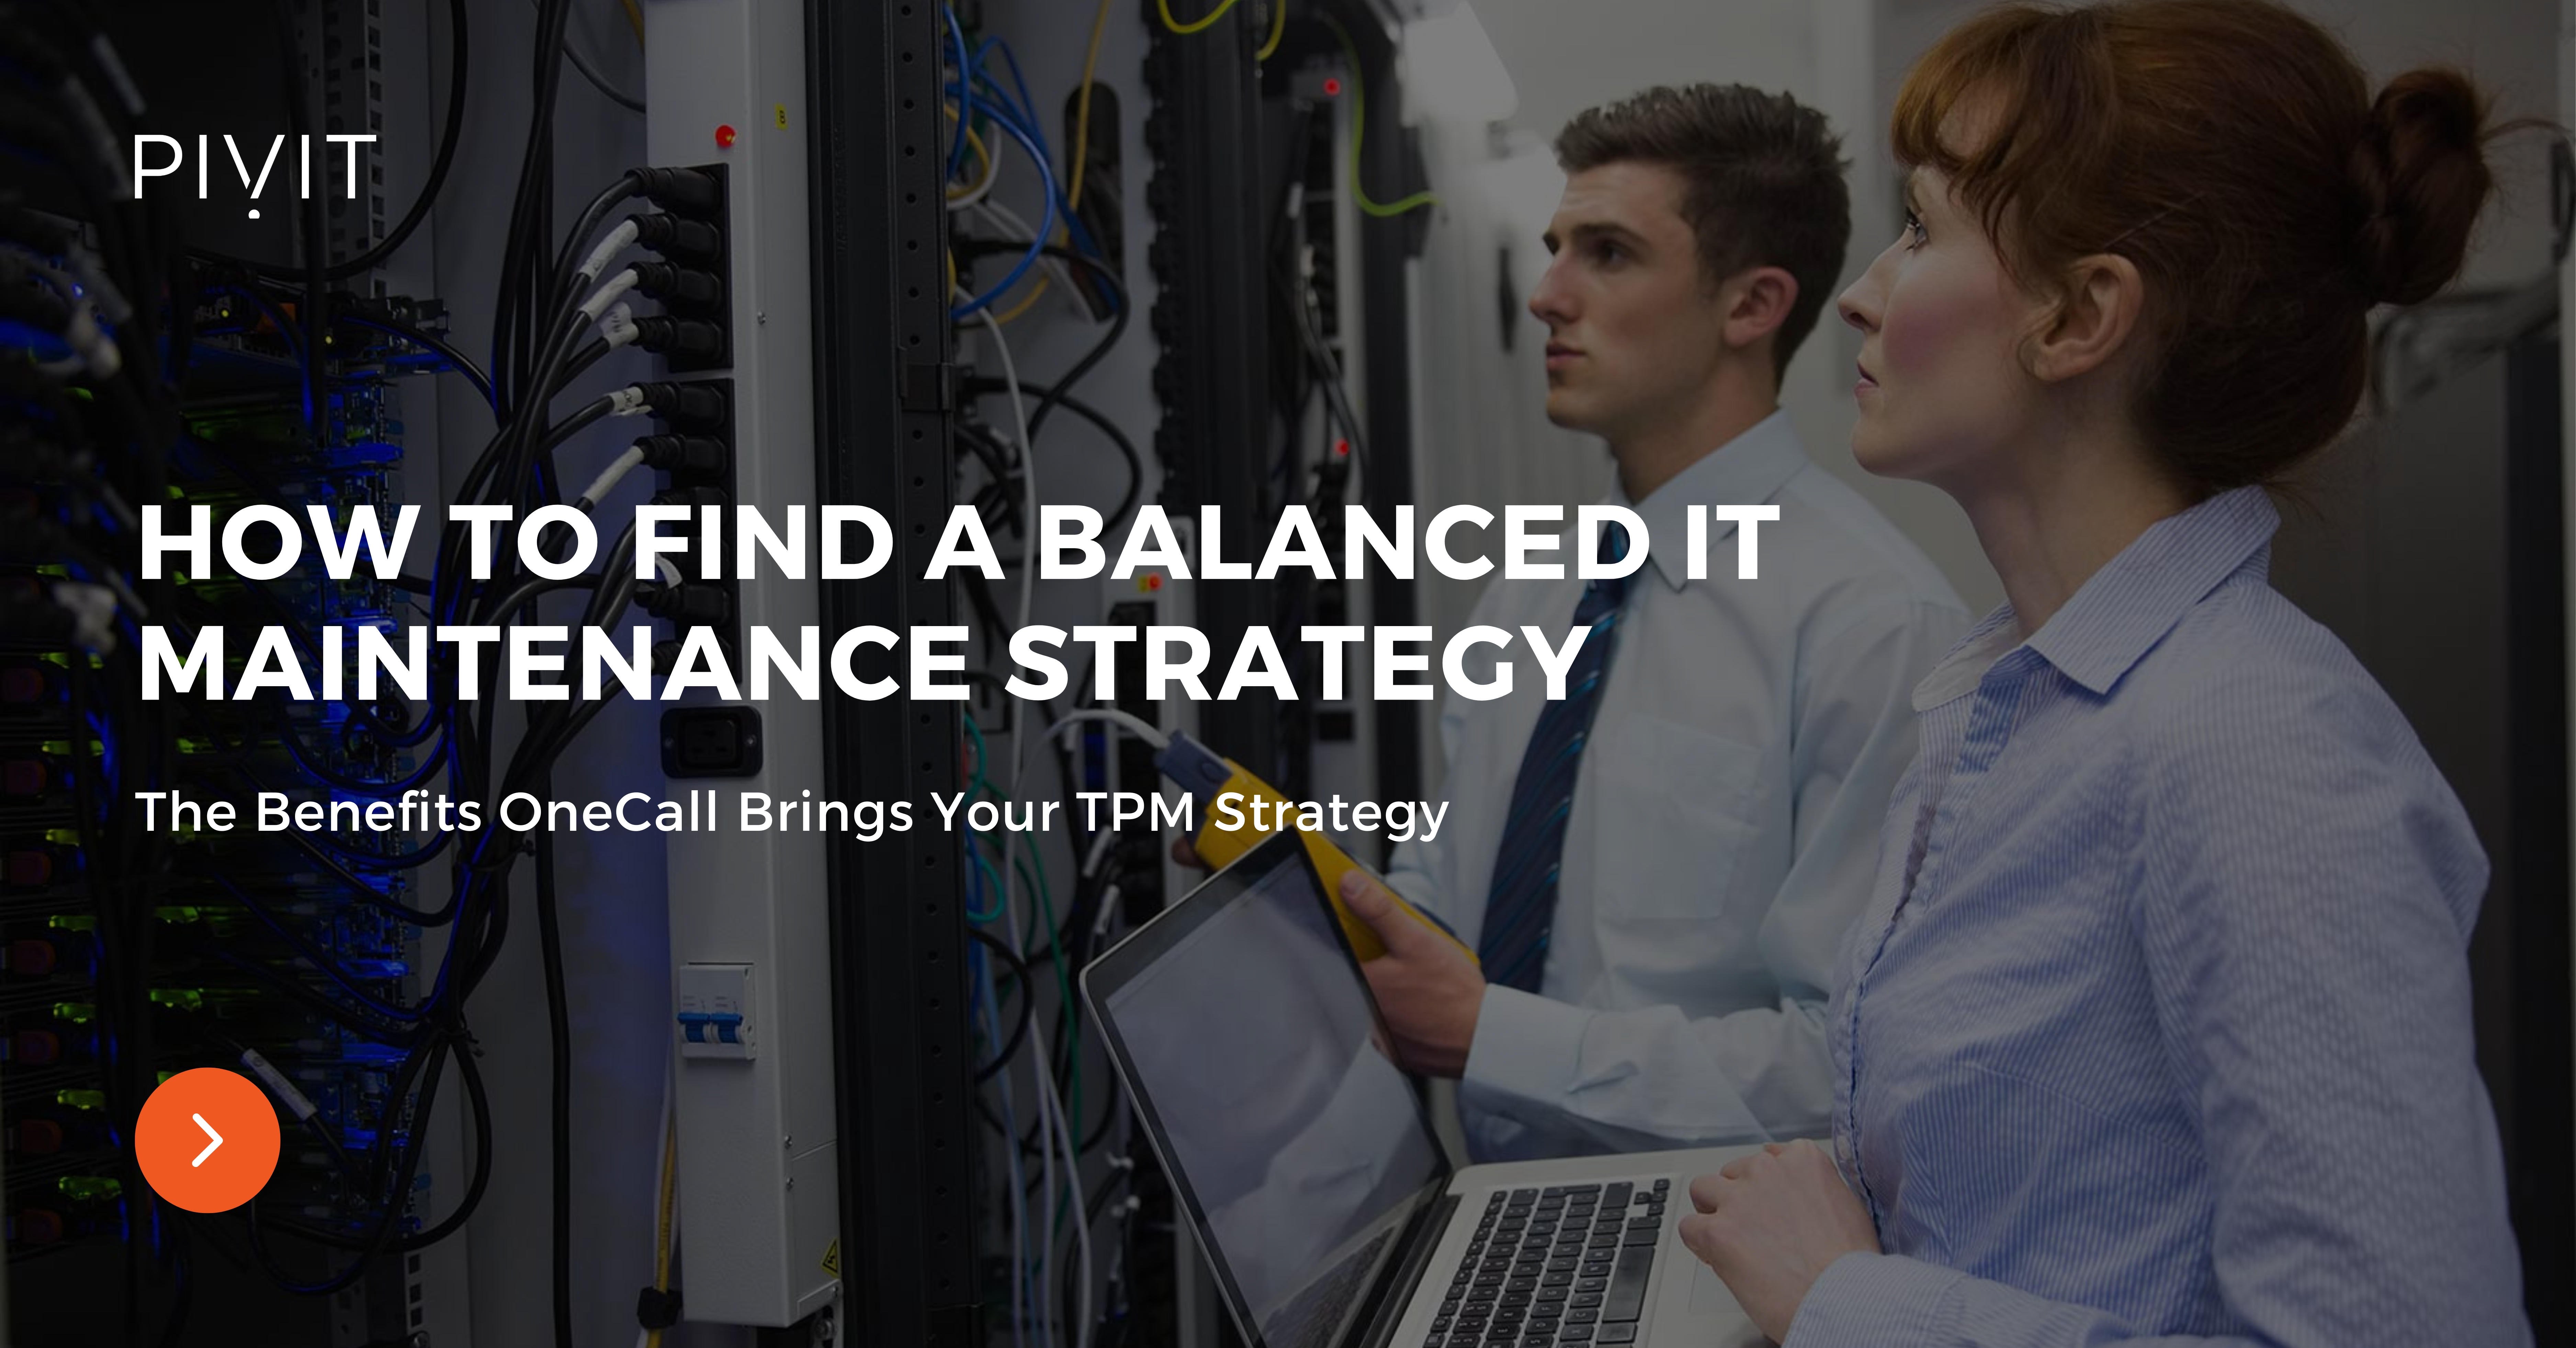 How to Find a Balanced IT Maintenance Strategy